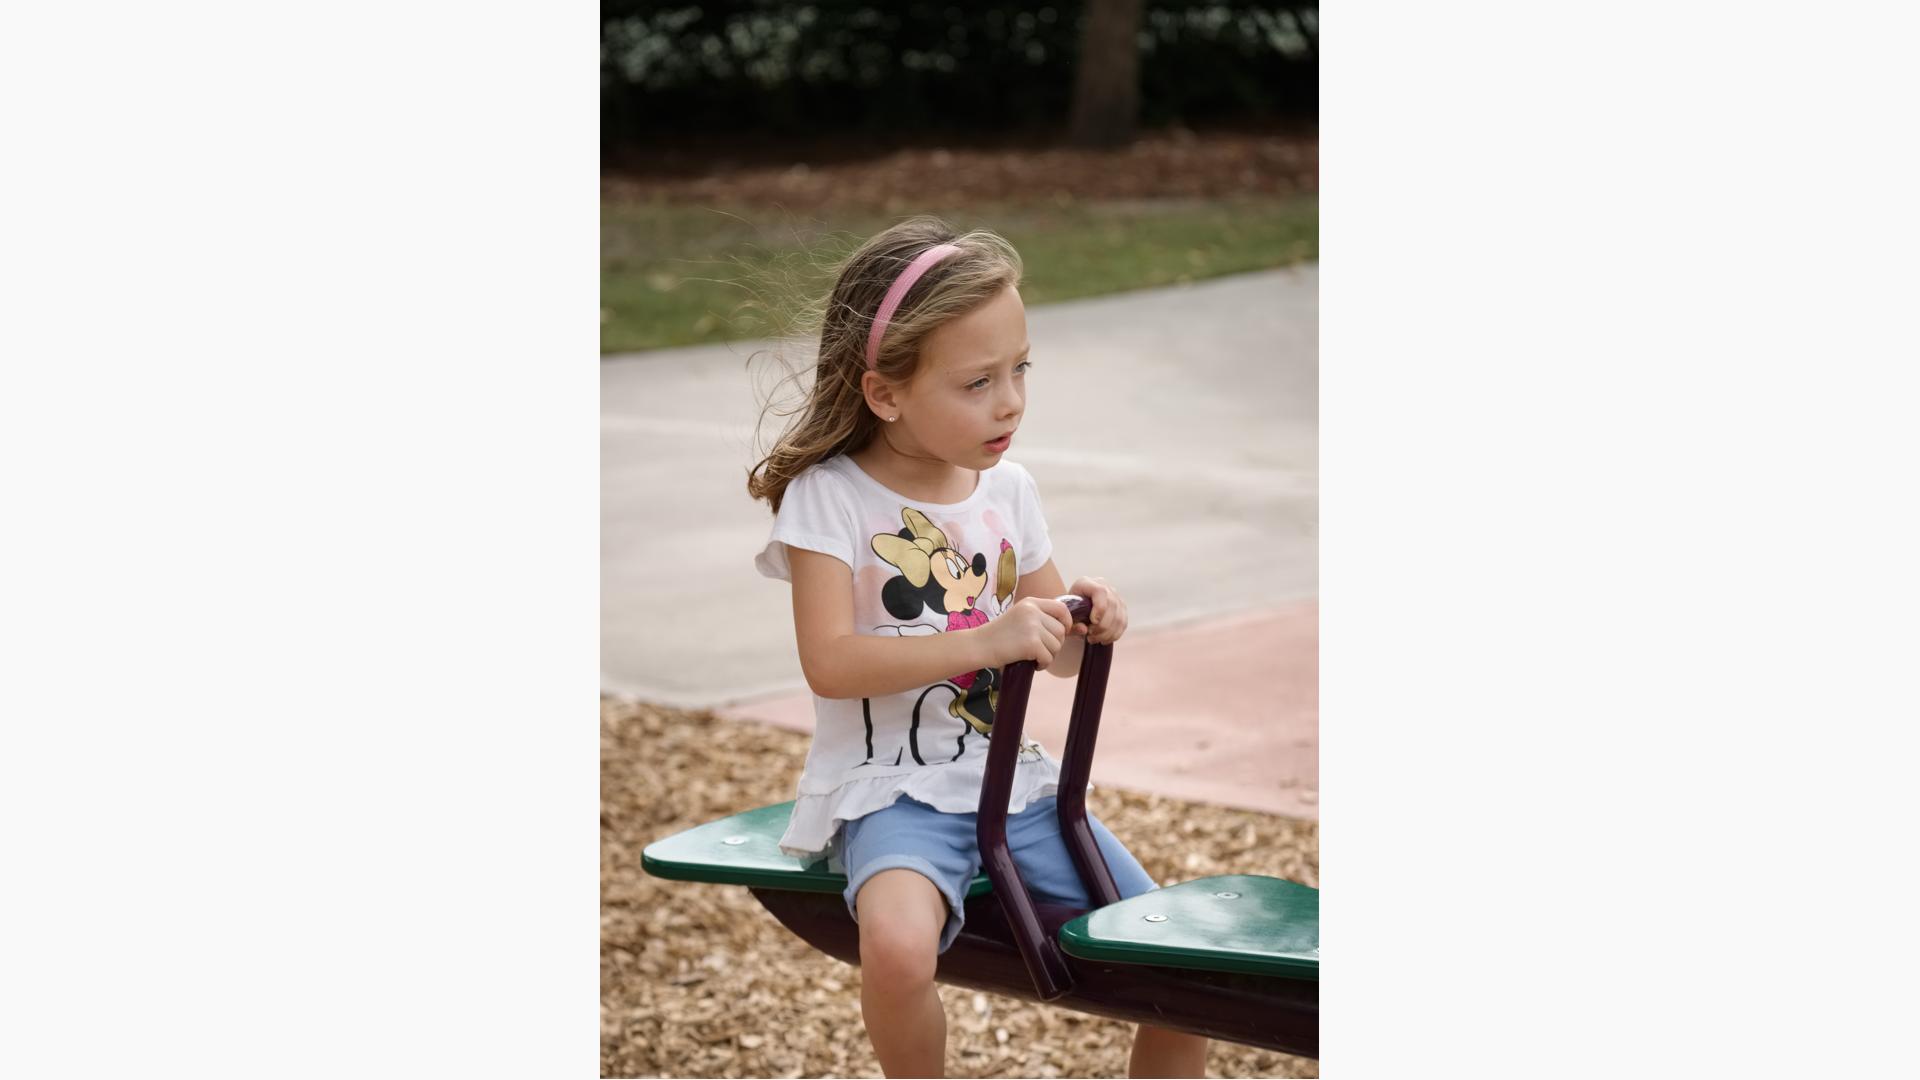 Girl sitting on see-saw